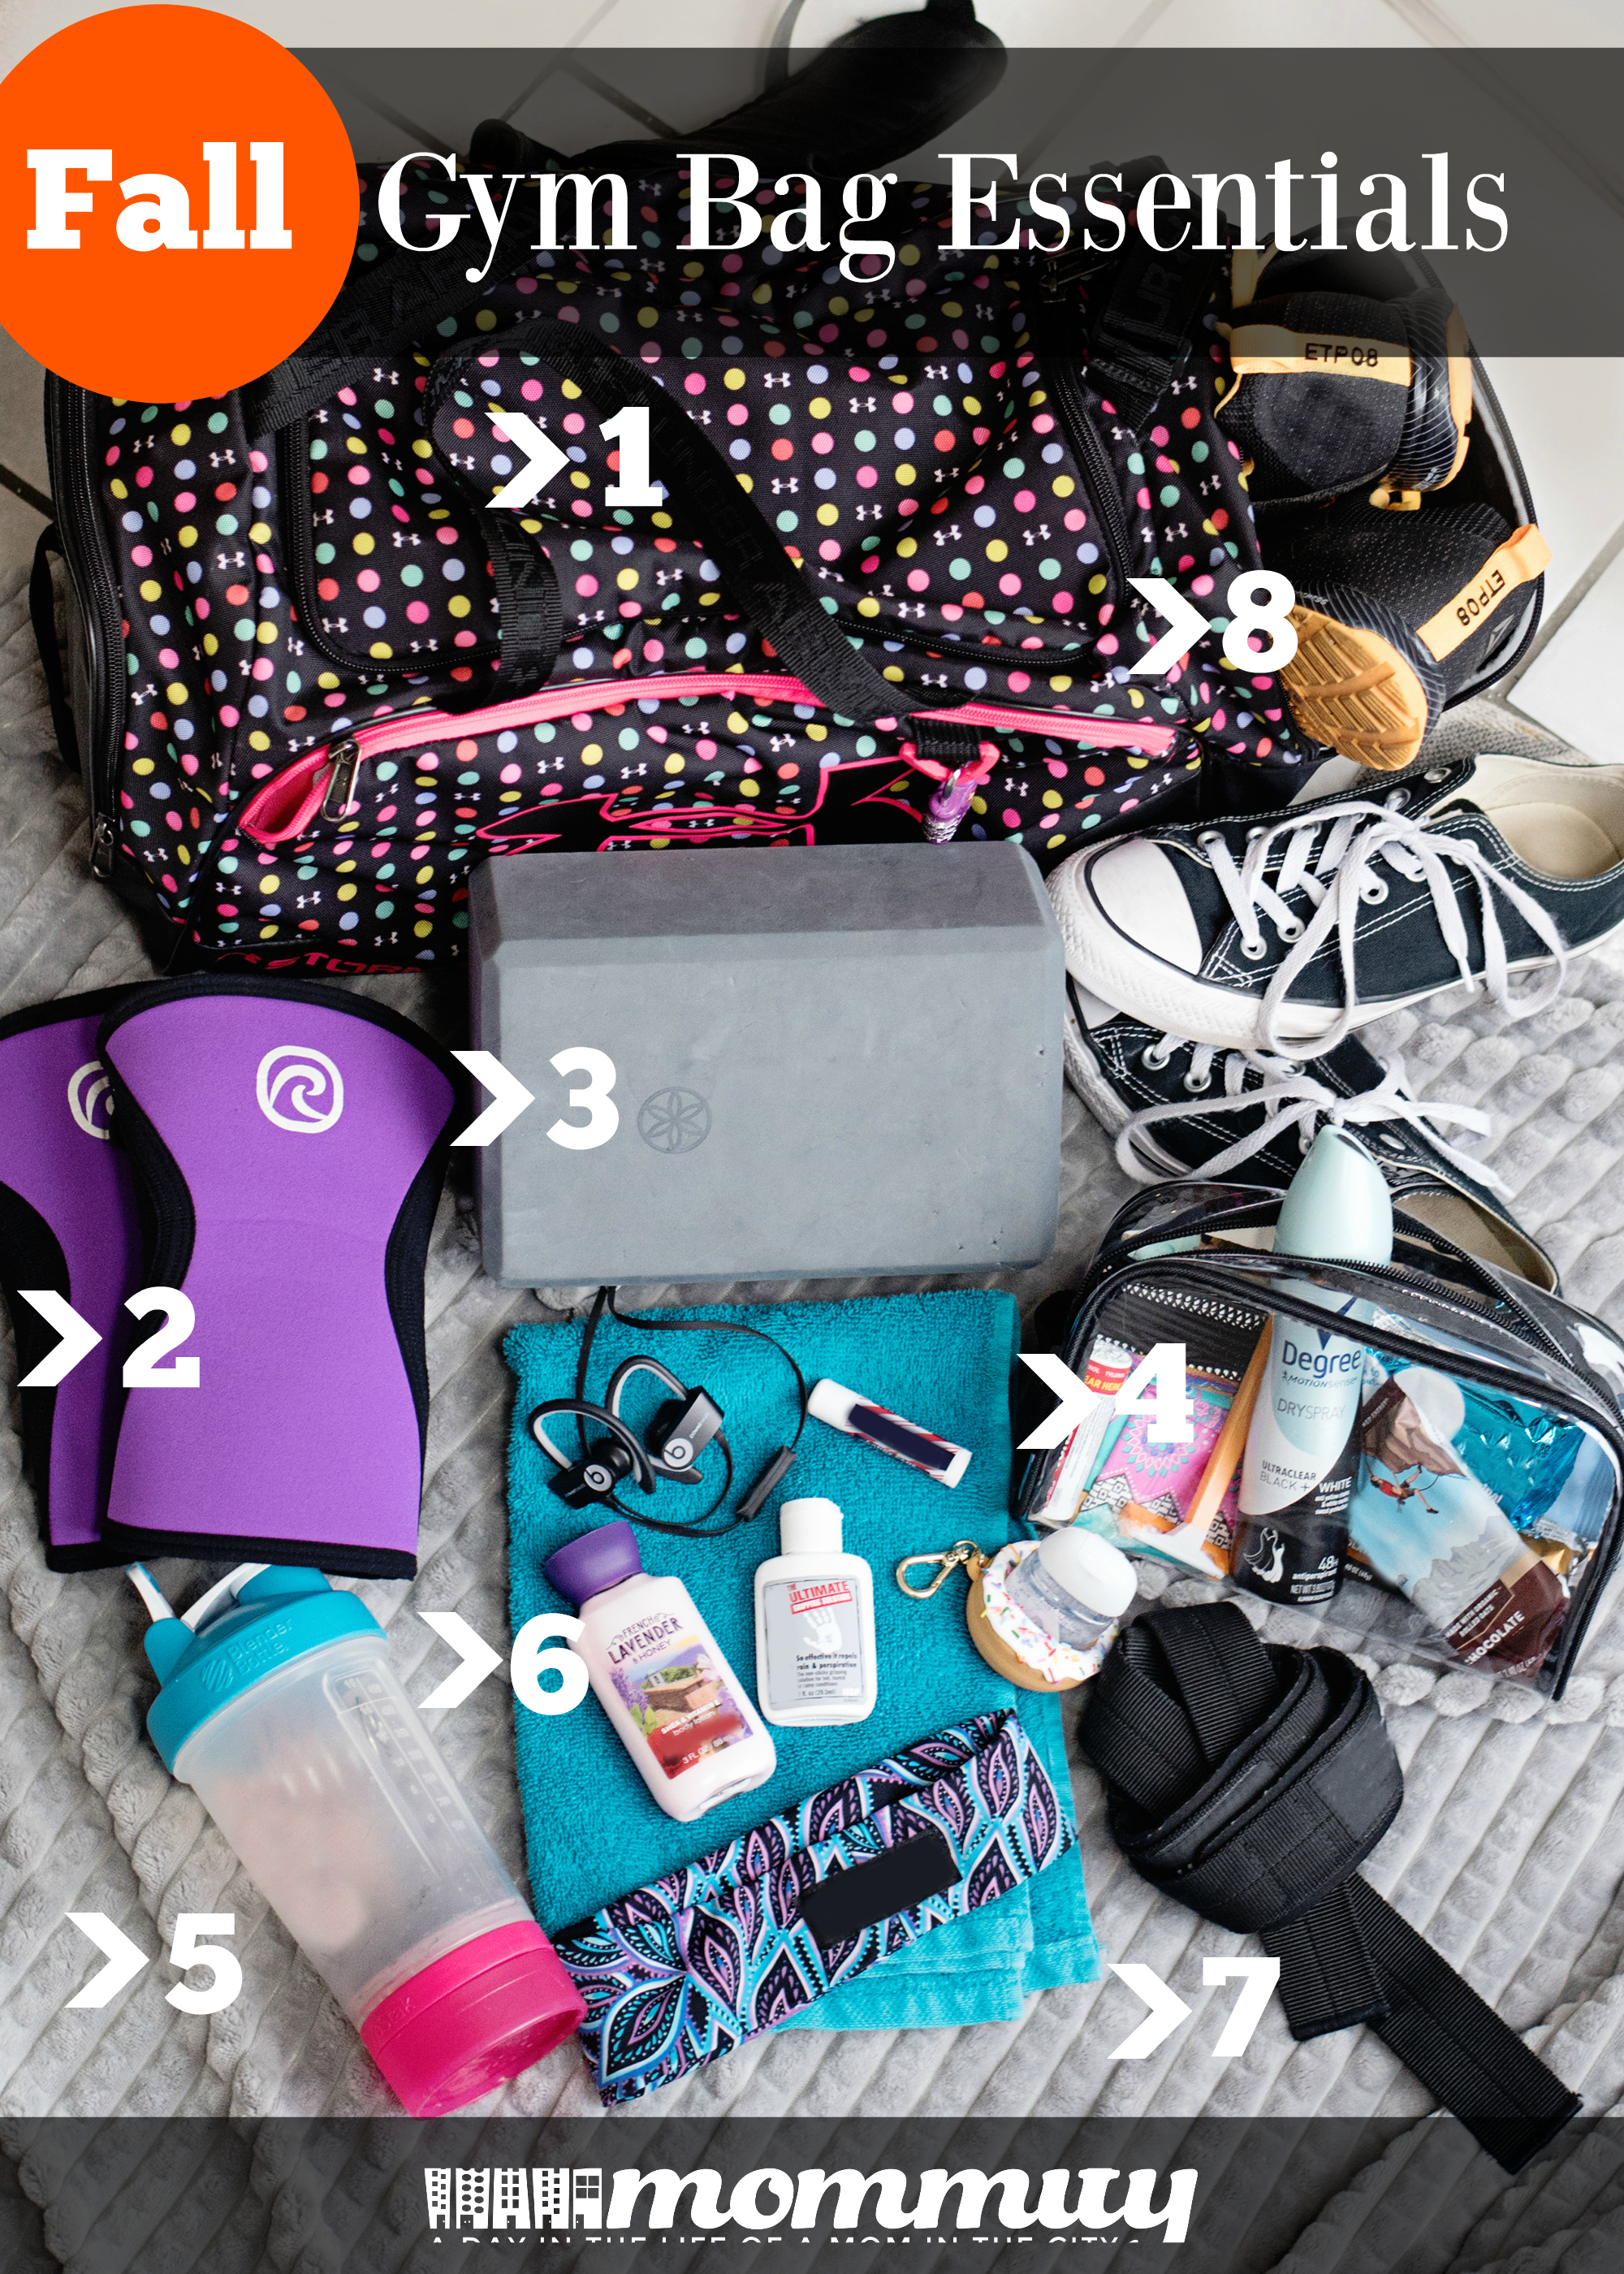 What to Bring to the Gym - Fall Gym Bag Essentials